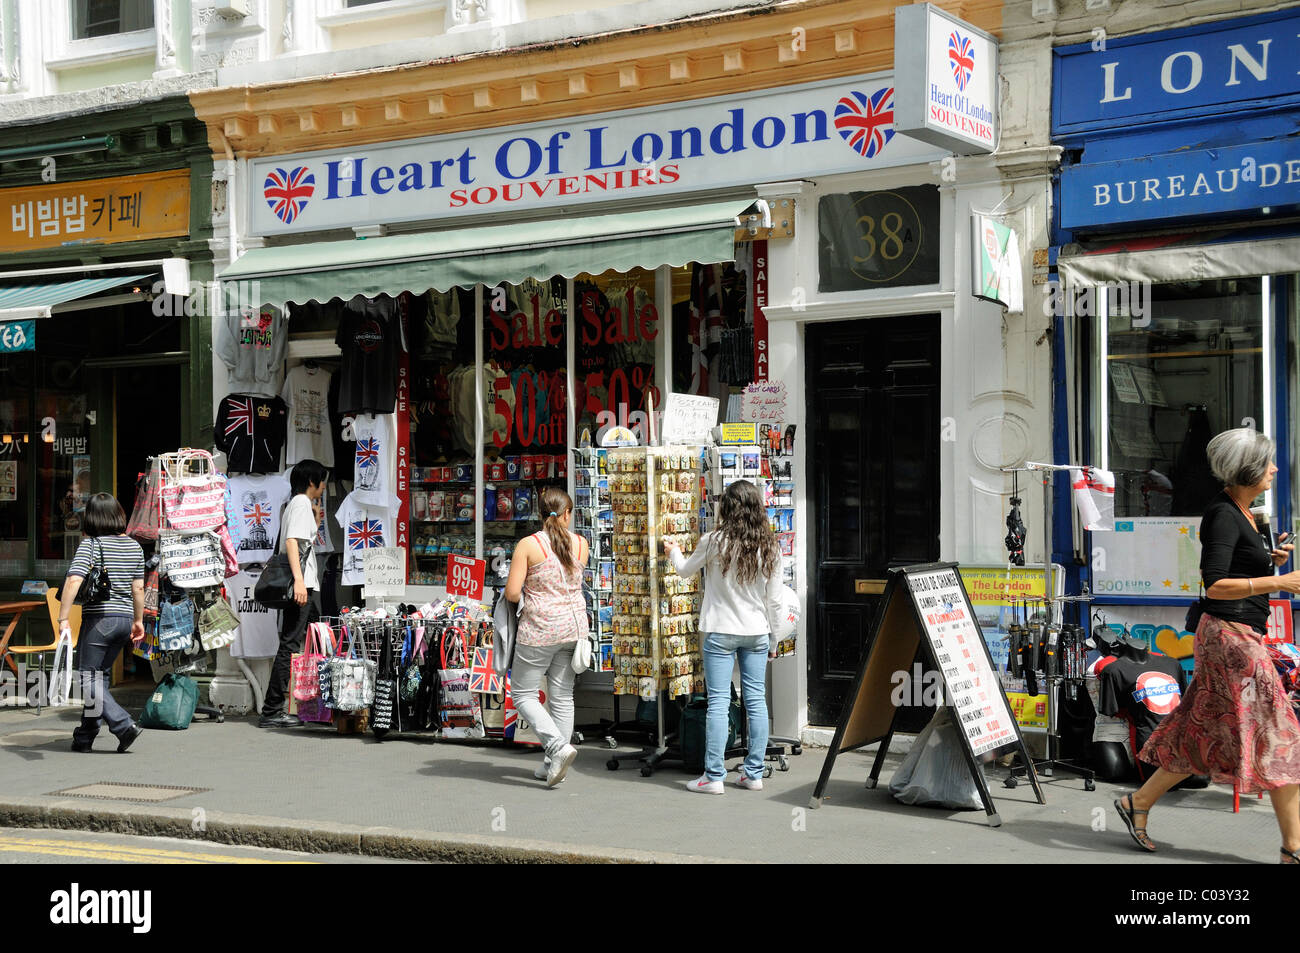 Heart of London Souvenirs tourist shop in Museum Street Bloomsbury London England UK Stock Photo